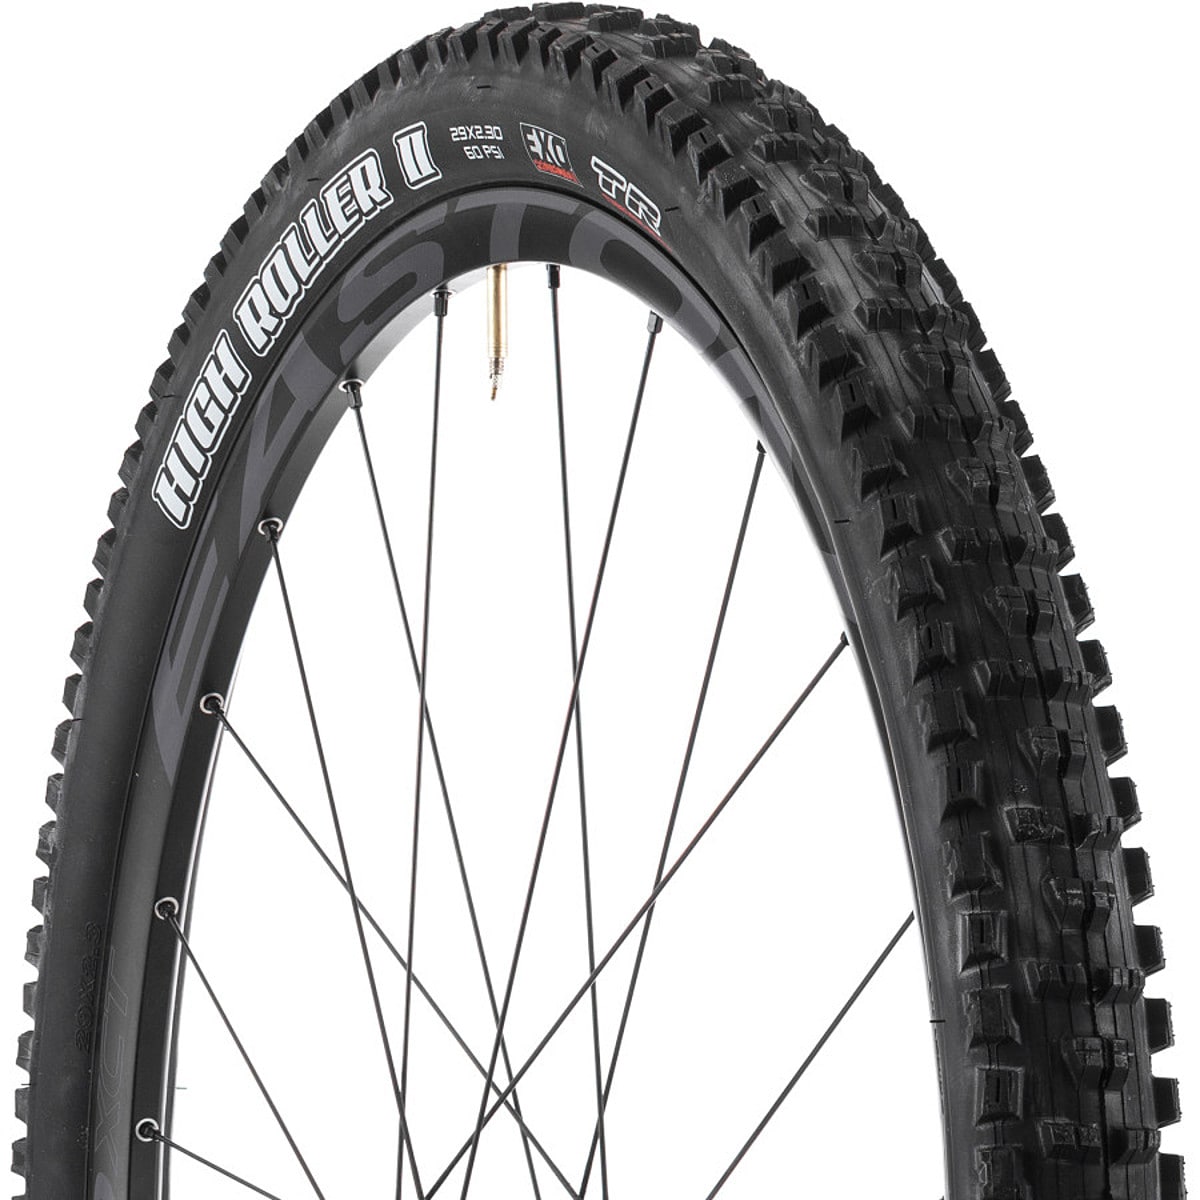 Maxxis High Roller II EXO Tire Tubeless Ready 29